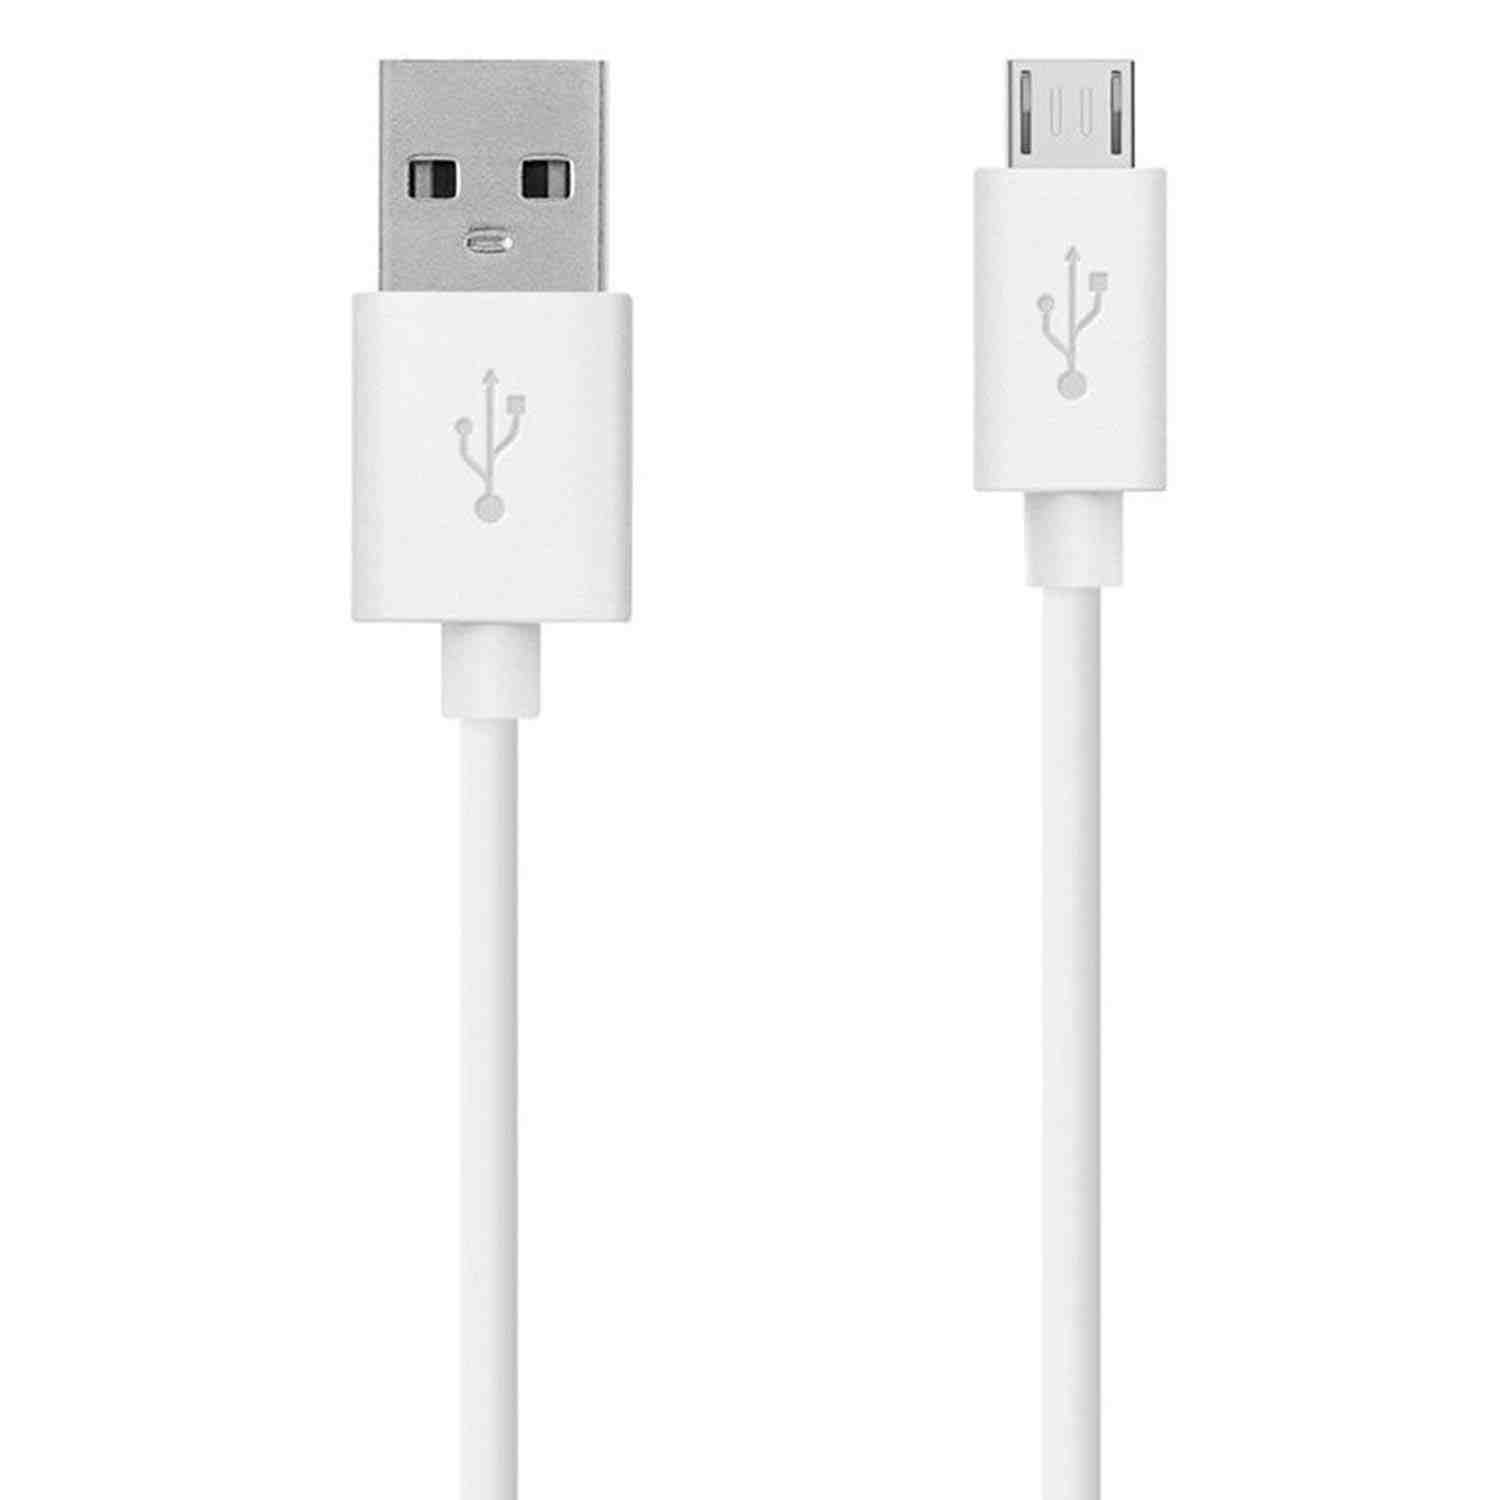 Micro USB fast charging USB Cable | Micro USB Data Cable | Quick Fast Charging Cable | Charger Cable | High Speed Transfer Android V8 Cable (2.4 Amp, 1 M, White)